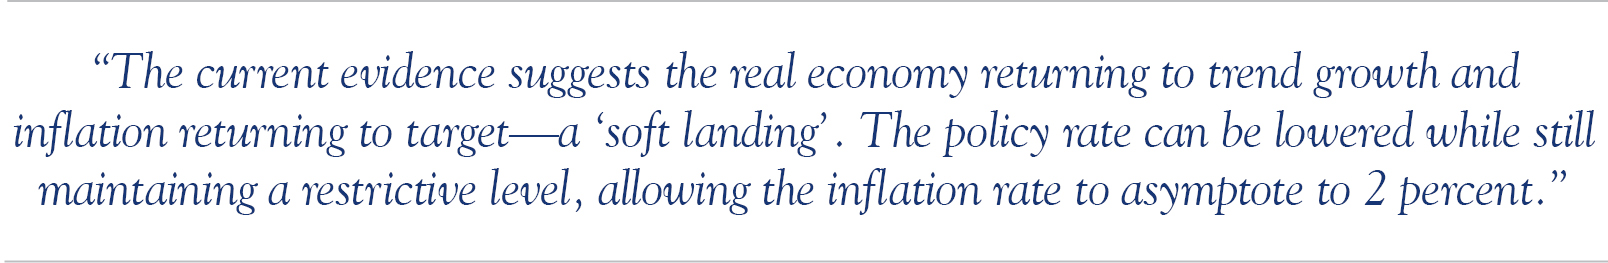 “The current evidence suggests the real economy returning to trend growth and inflation returning to target—a ‘soft landing’. The policy rate can be lowered while still maintaining a restrictive level, allowing the inflation rate to asymptote to 2 percent.” 